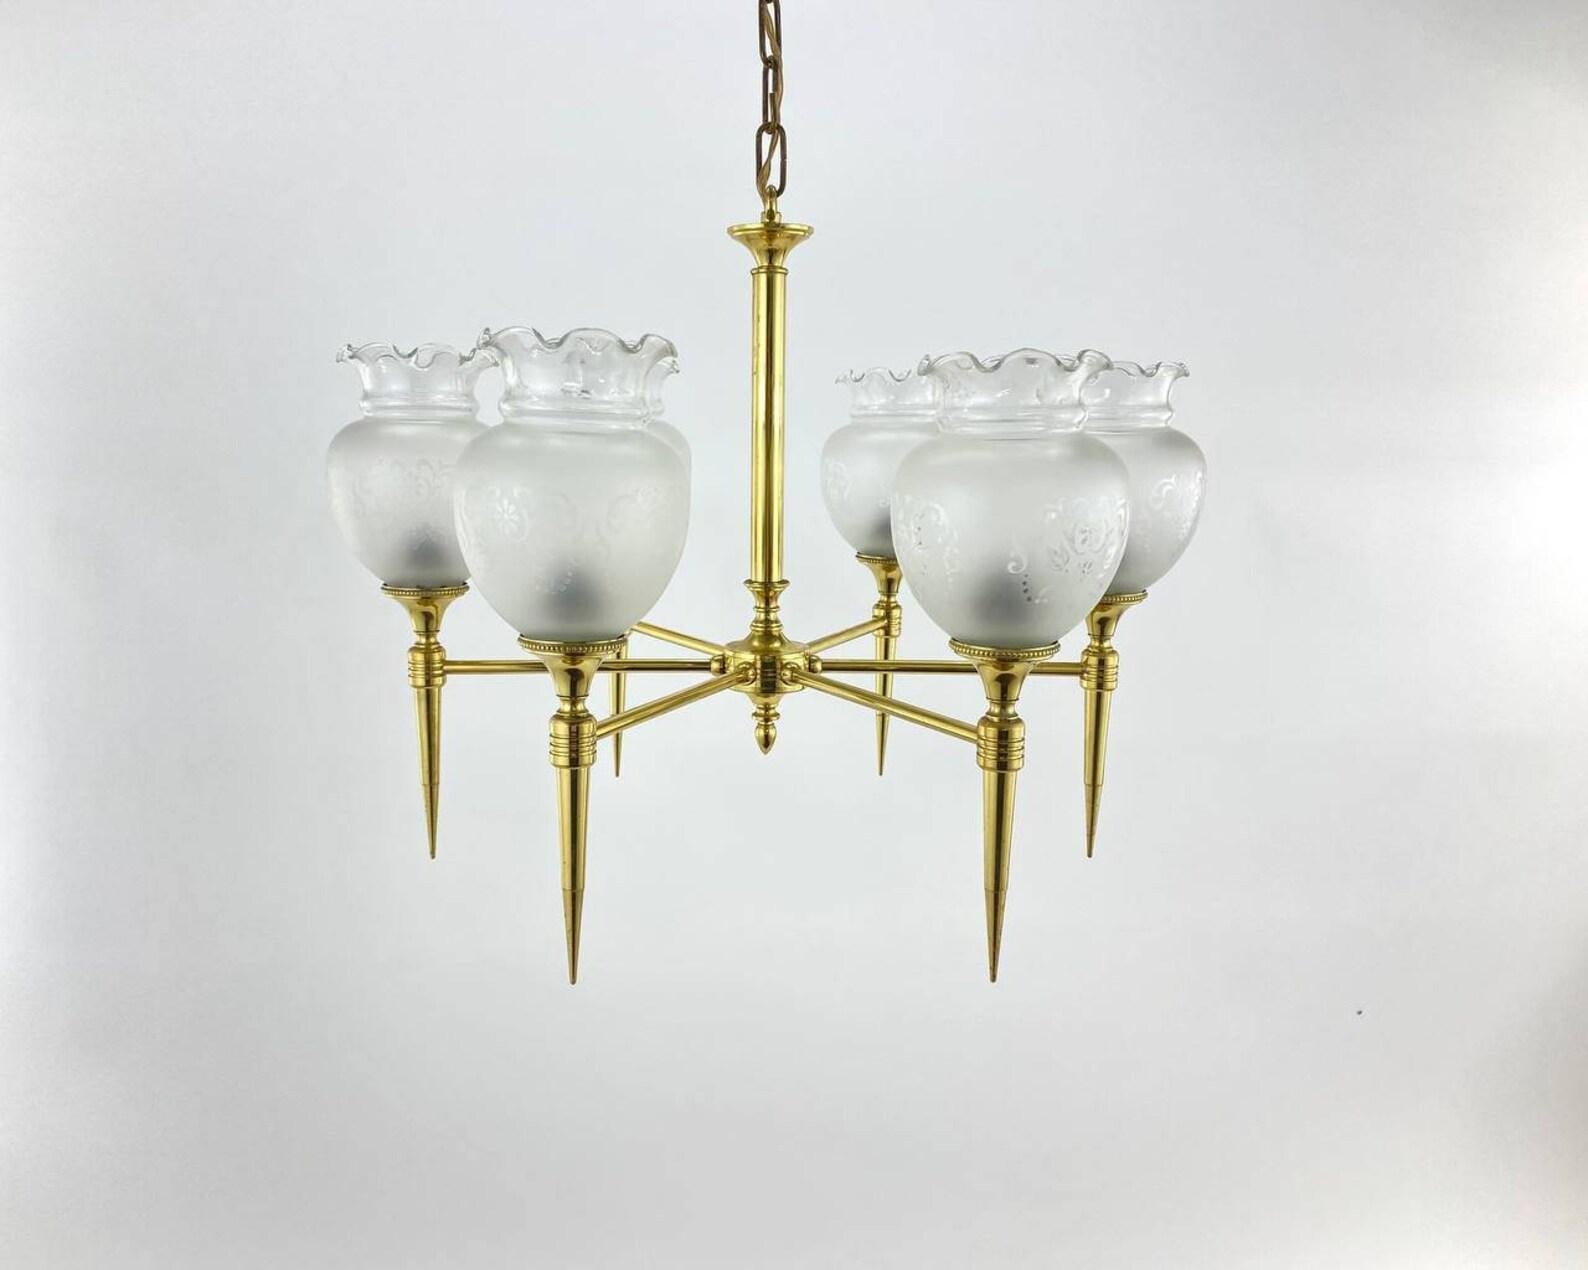 Vintage 6 Light Chandelier Brass and Frosted Glass Ceiling Lamp, France, 1970 In Excellent Condition For Sale In Bastogne, BE